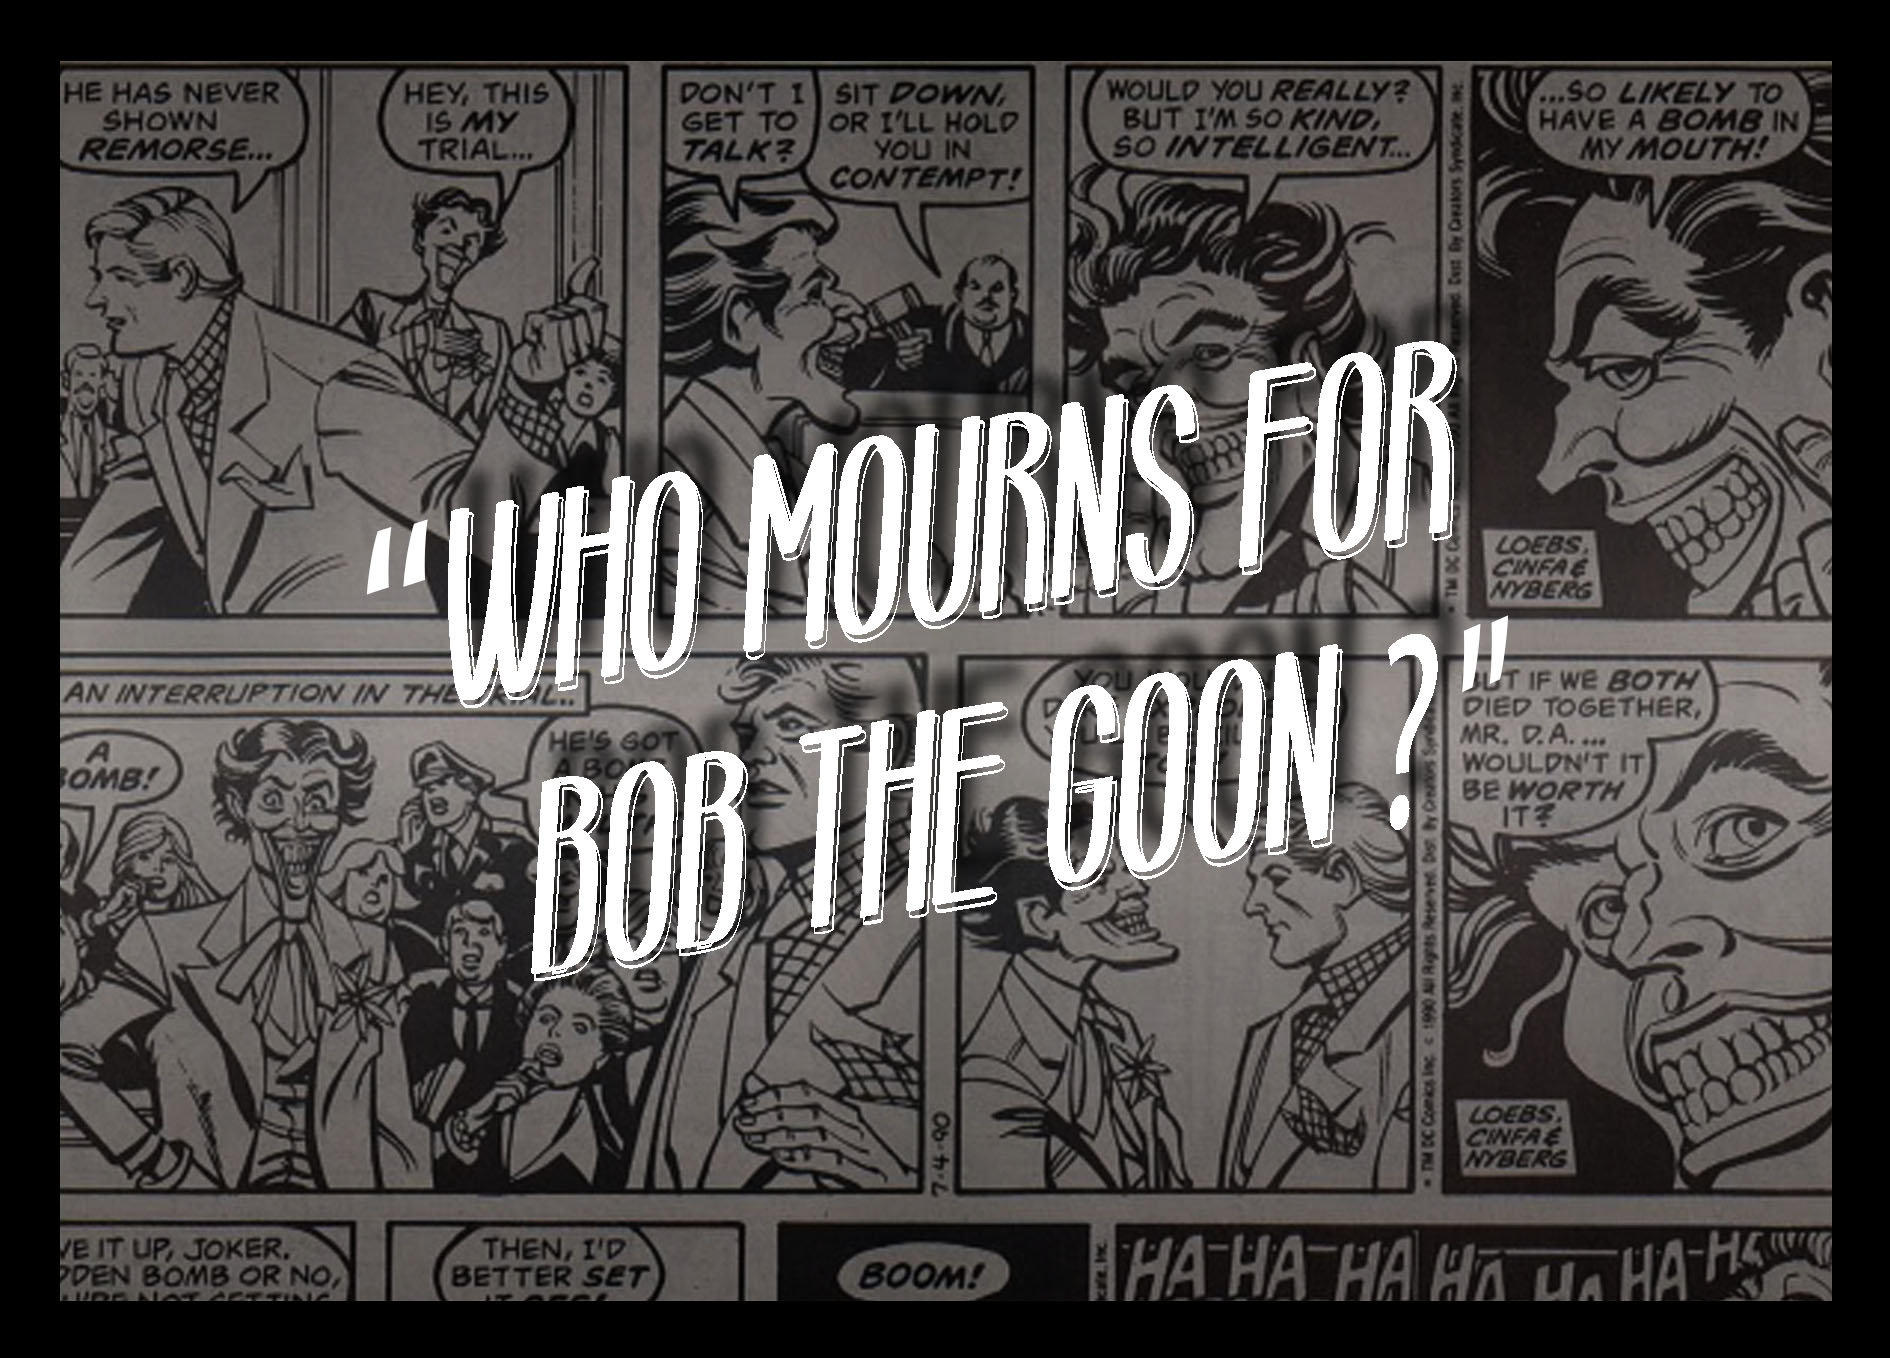 Who Mourns for Bob the Goon